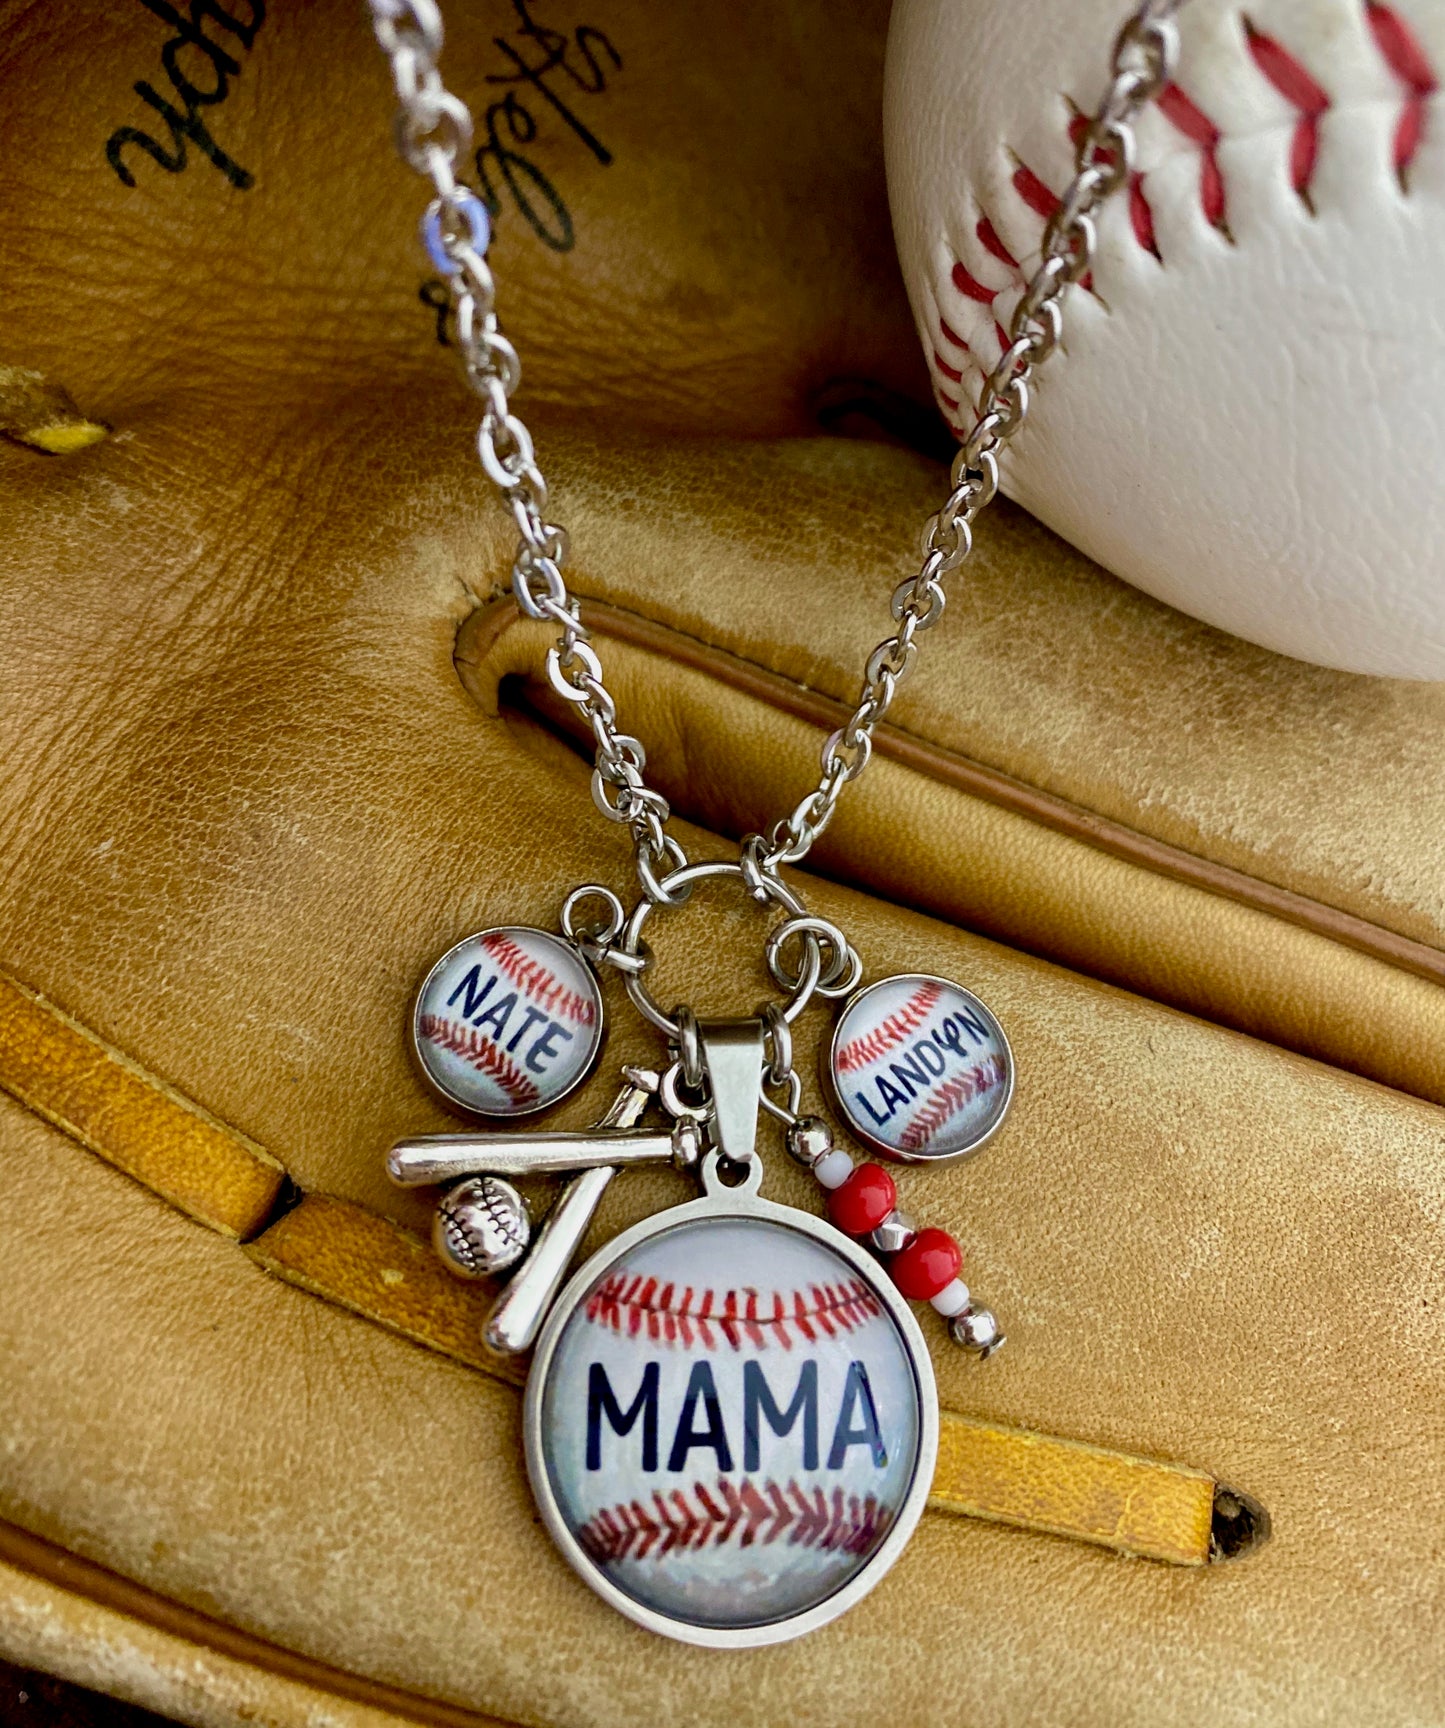 Baseball Mama Necklace- Includes 2 custom charms (name, number, or photo)